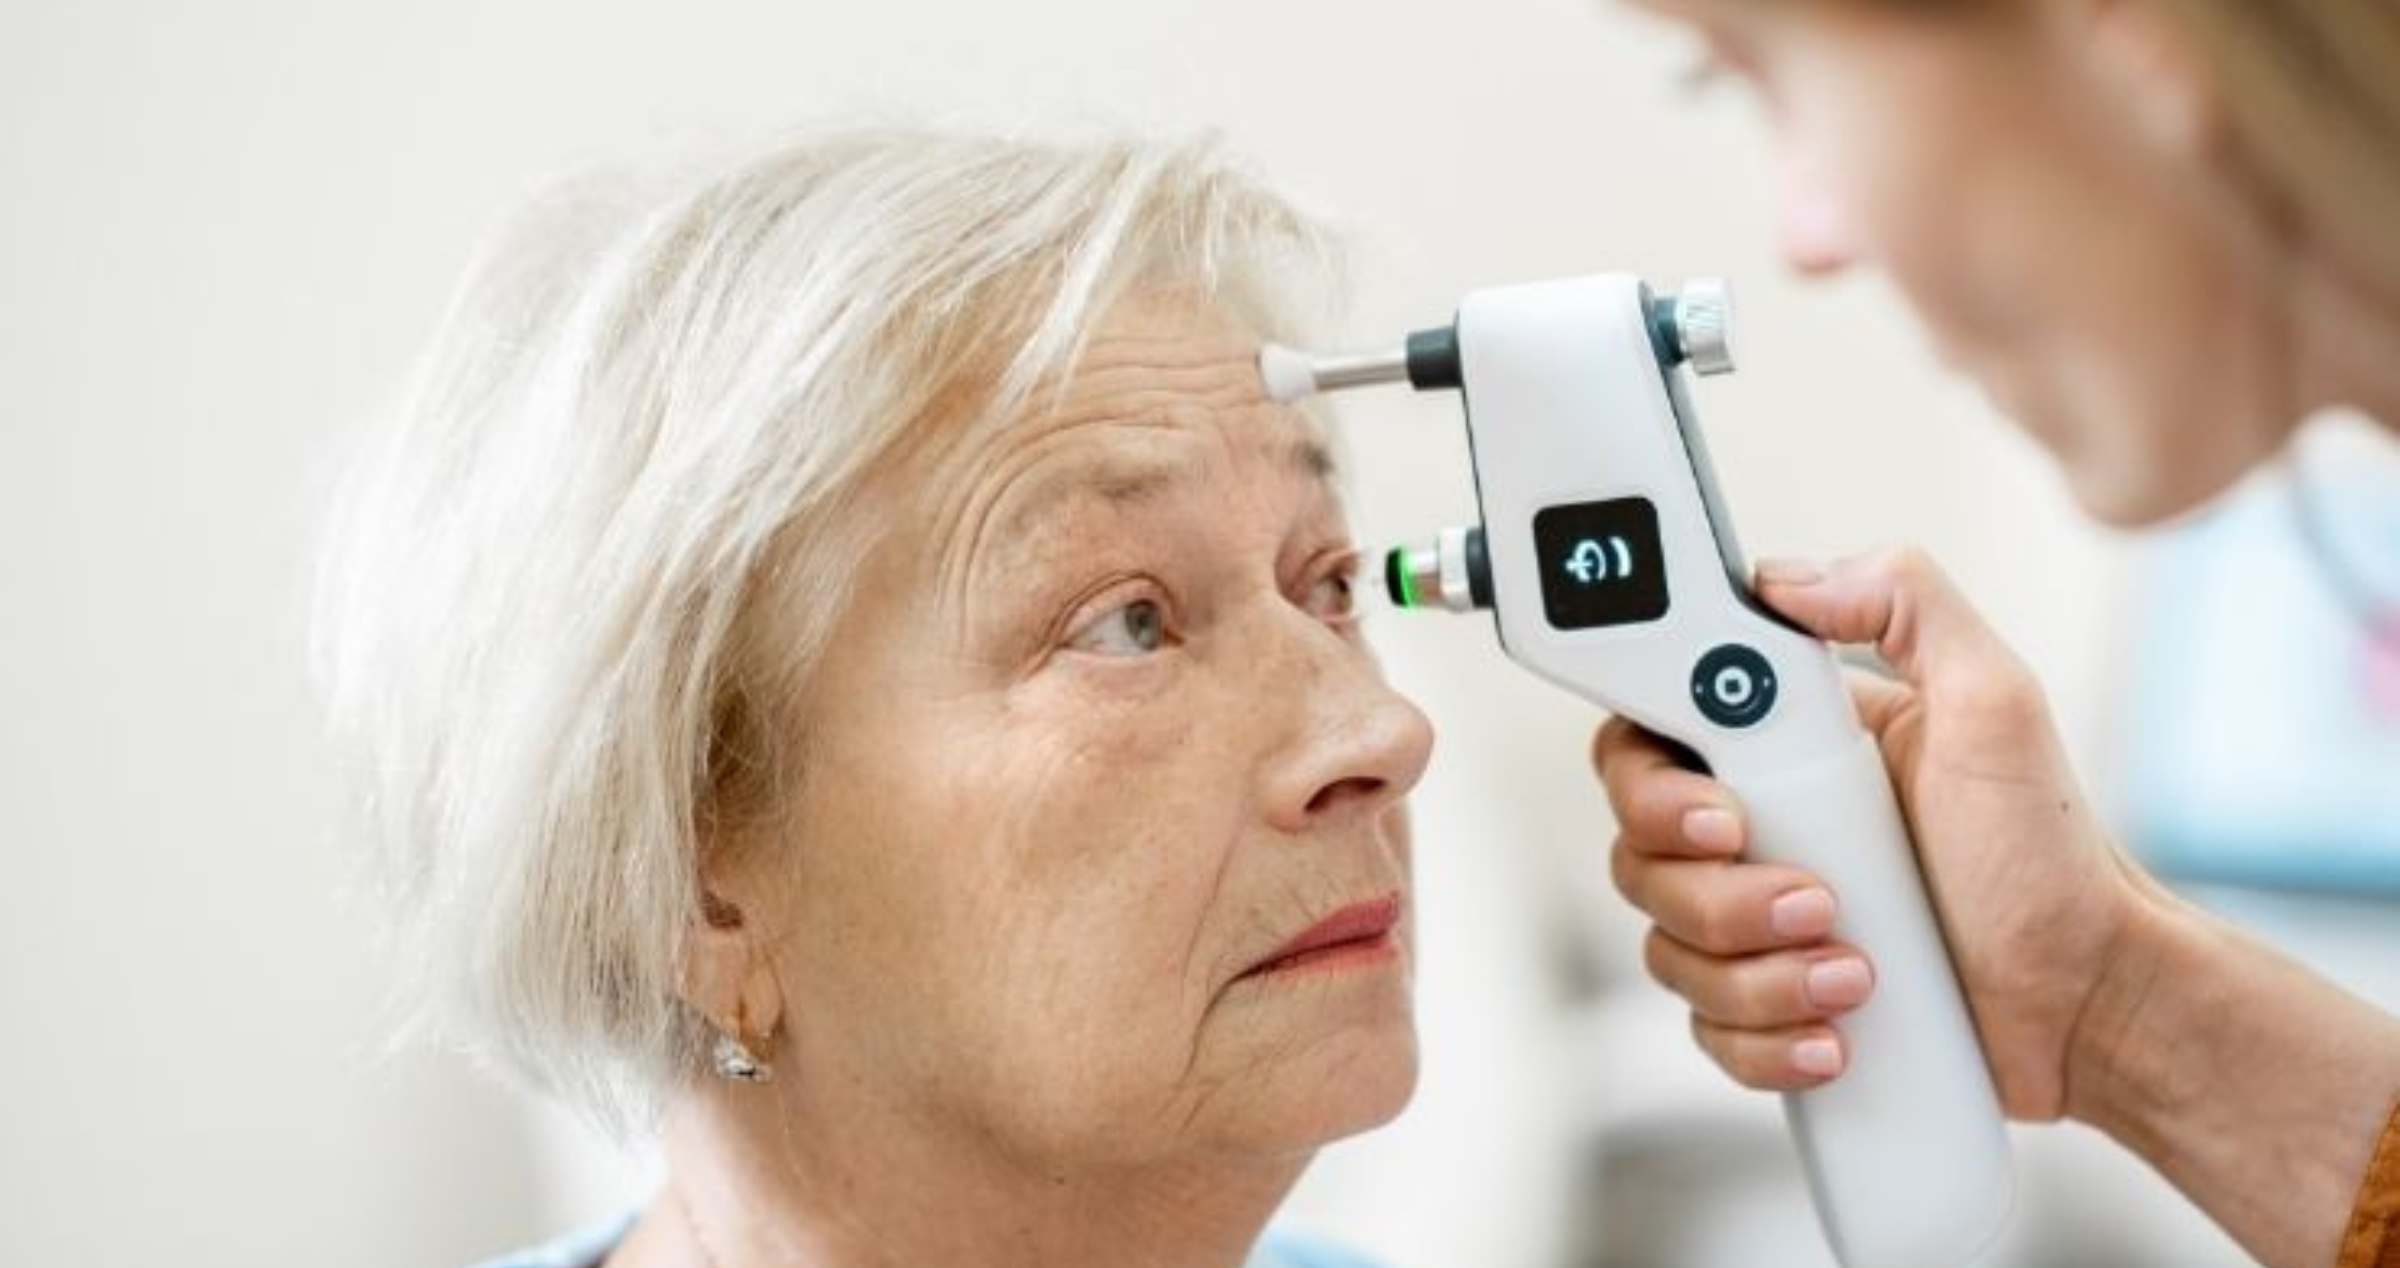 Image of a woman undergoing an eye pressure test